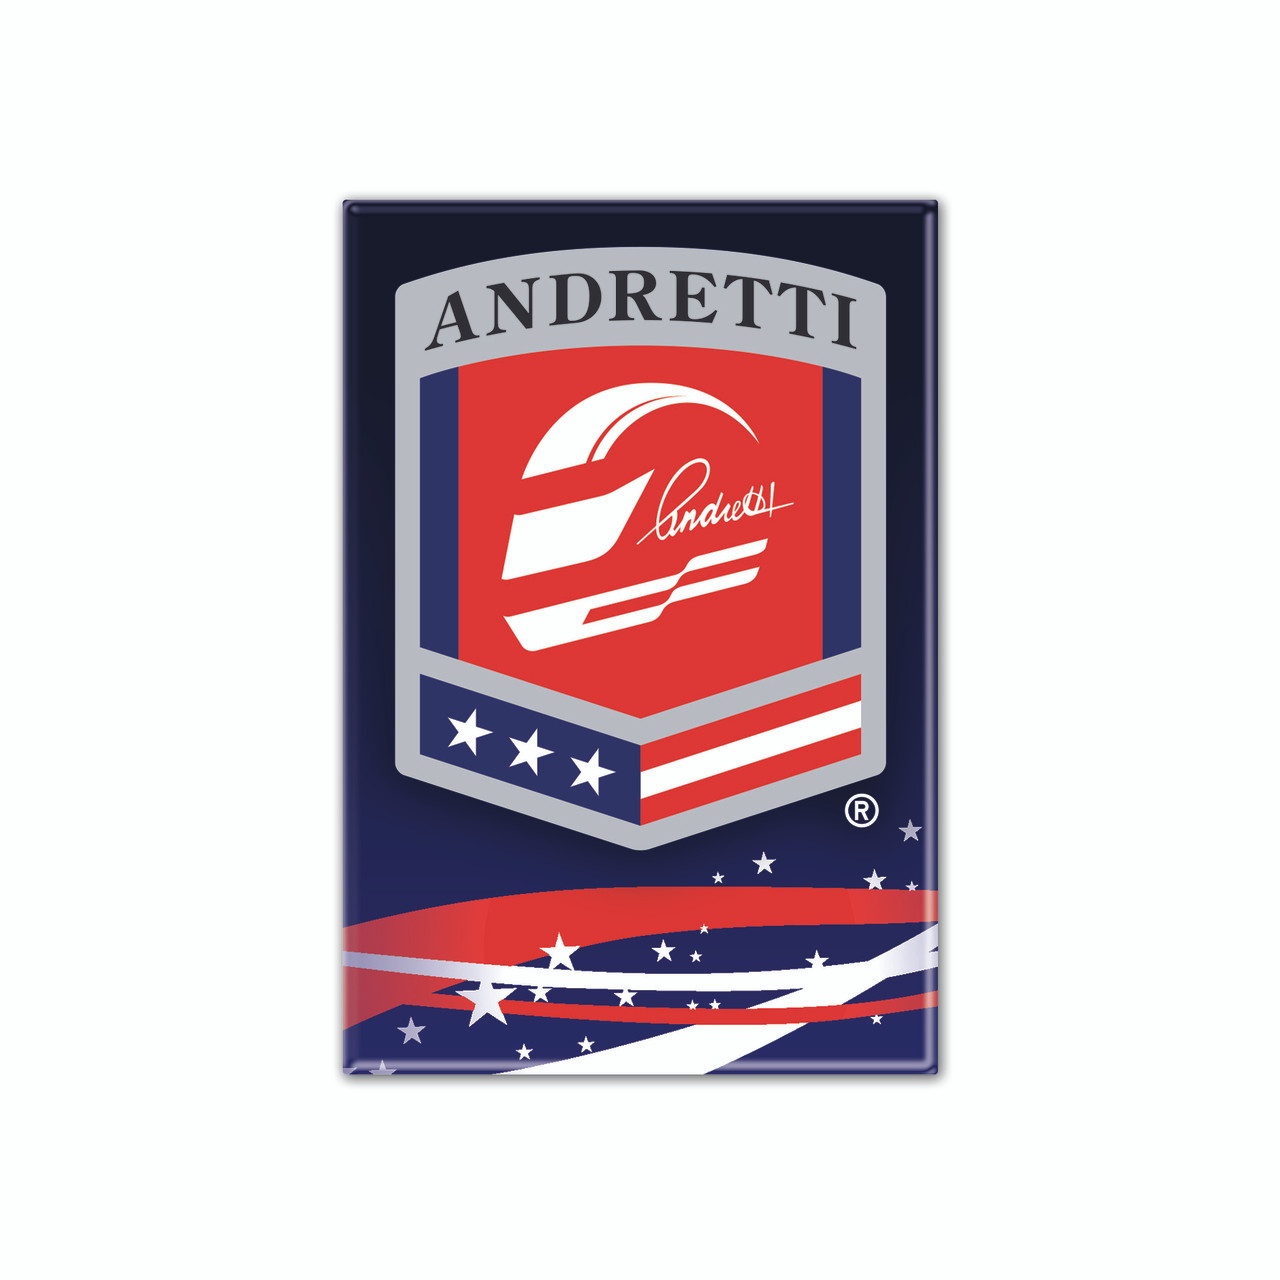 Andretti Autosport 3x2 Team Magnet - Indianapolis Motor Speedway/INDYCAR